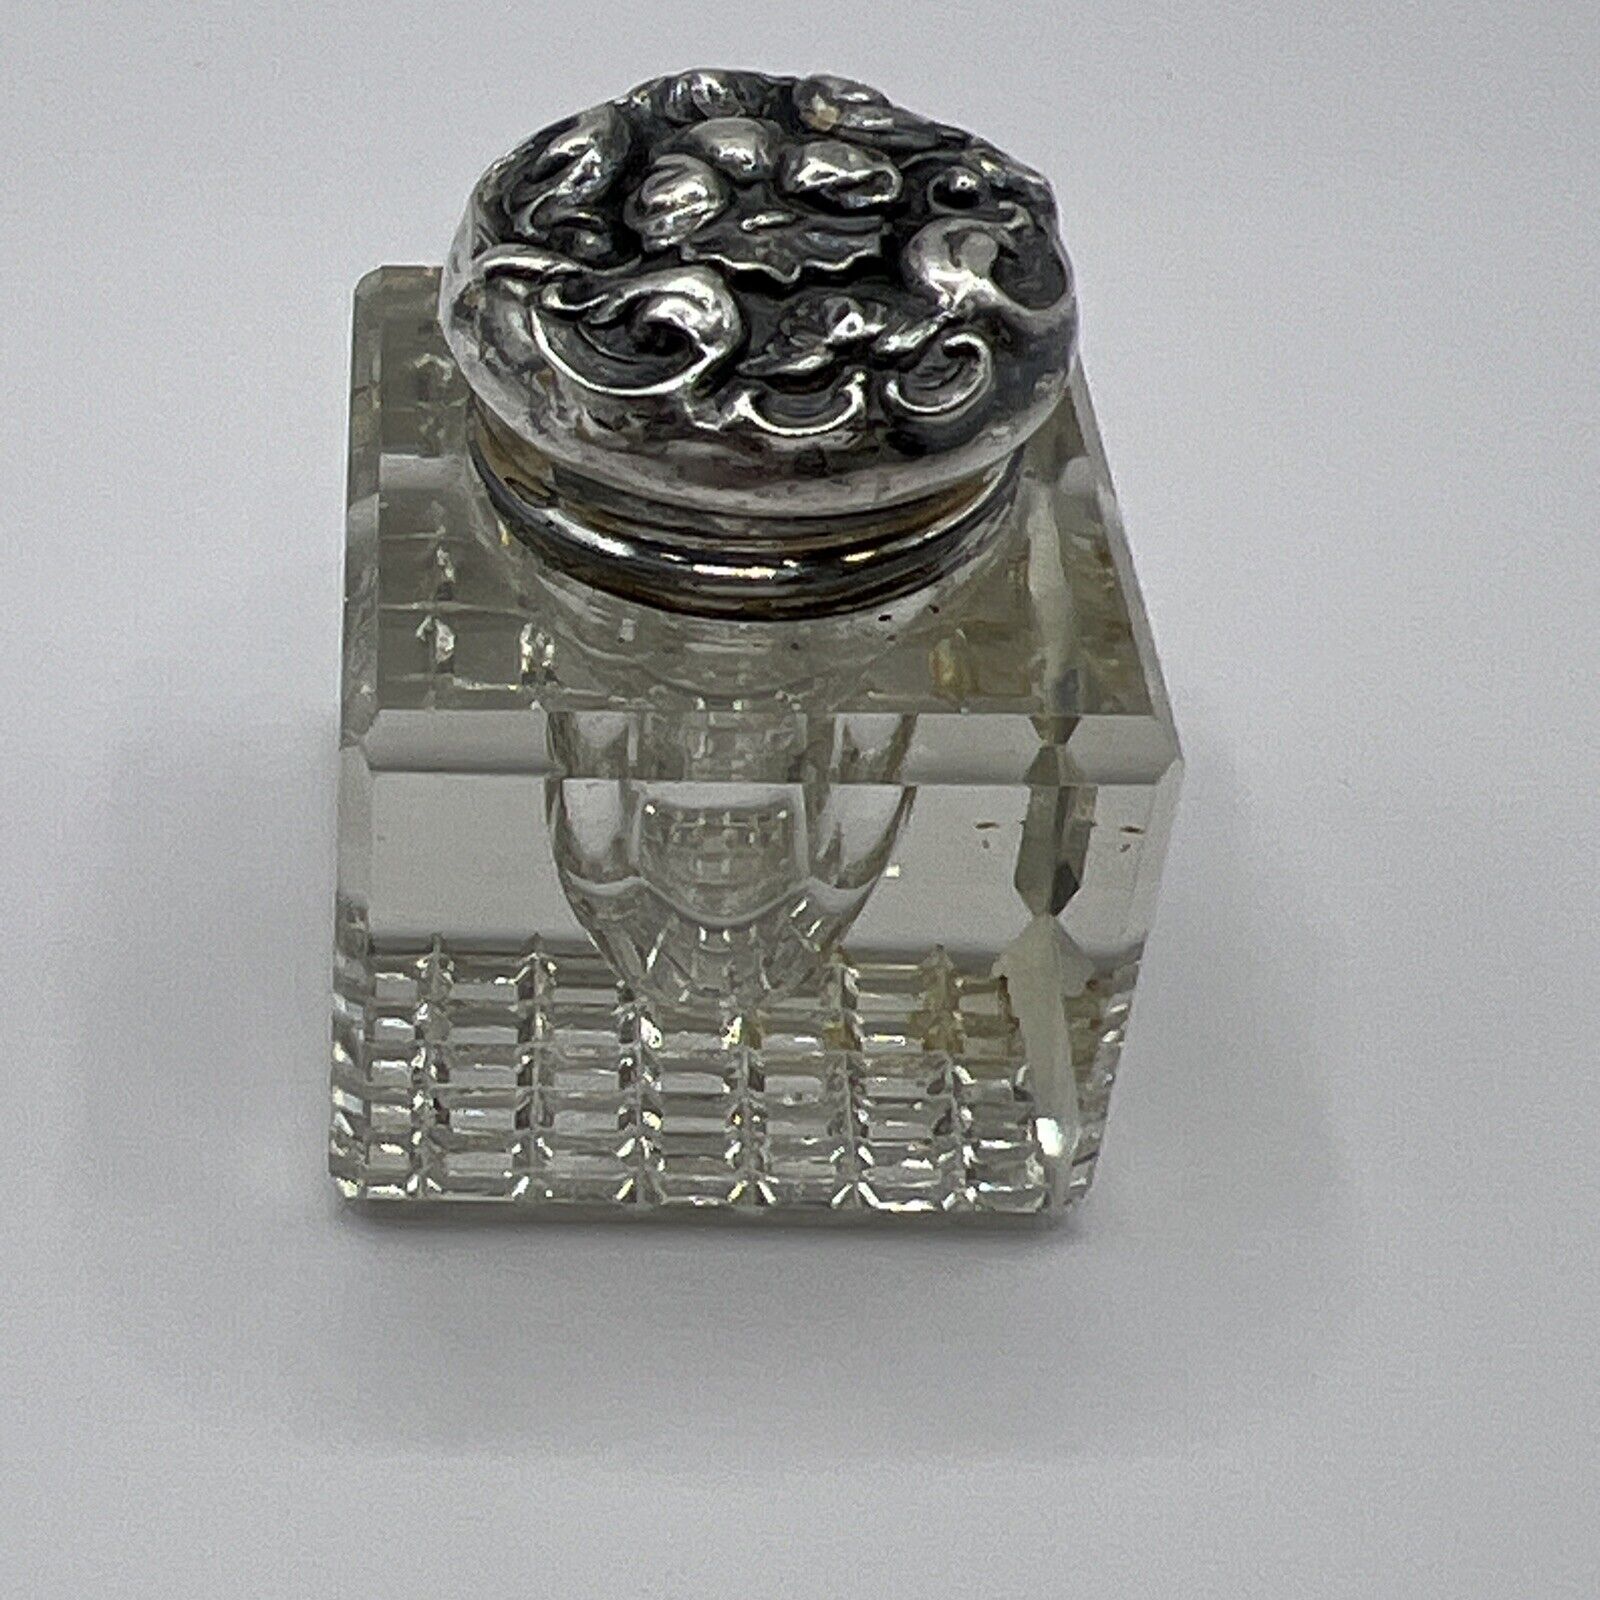 M24- Antique Art Nouveau Floral Sterling Silver Screw Lid Cut Glass Cube Inkwell